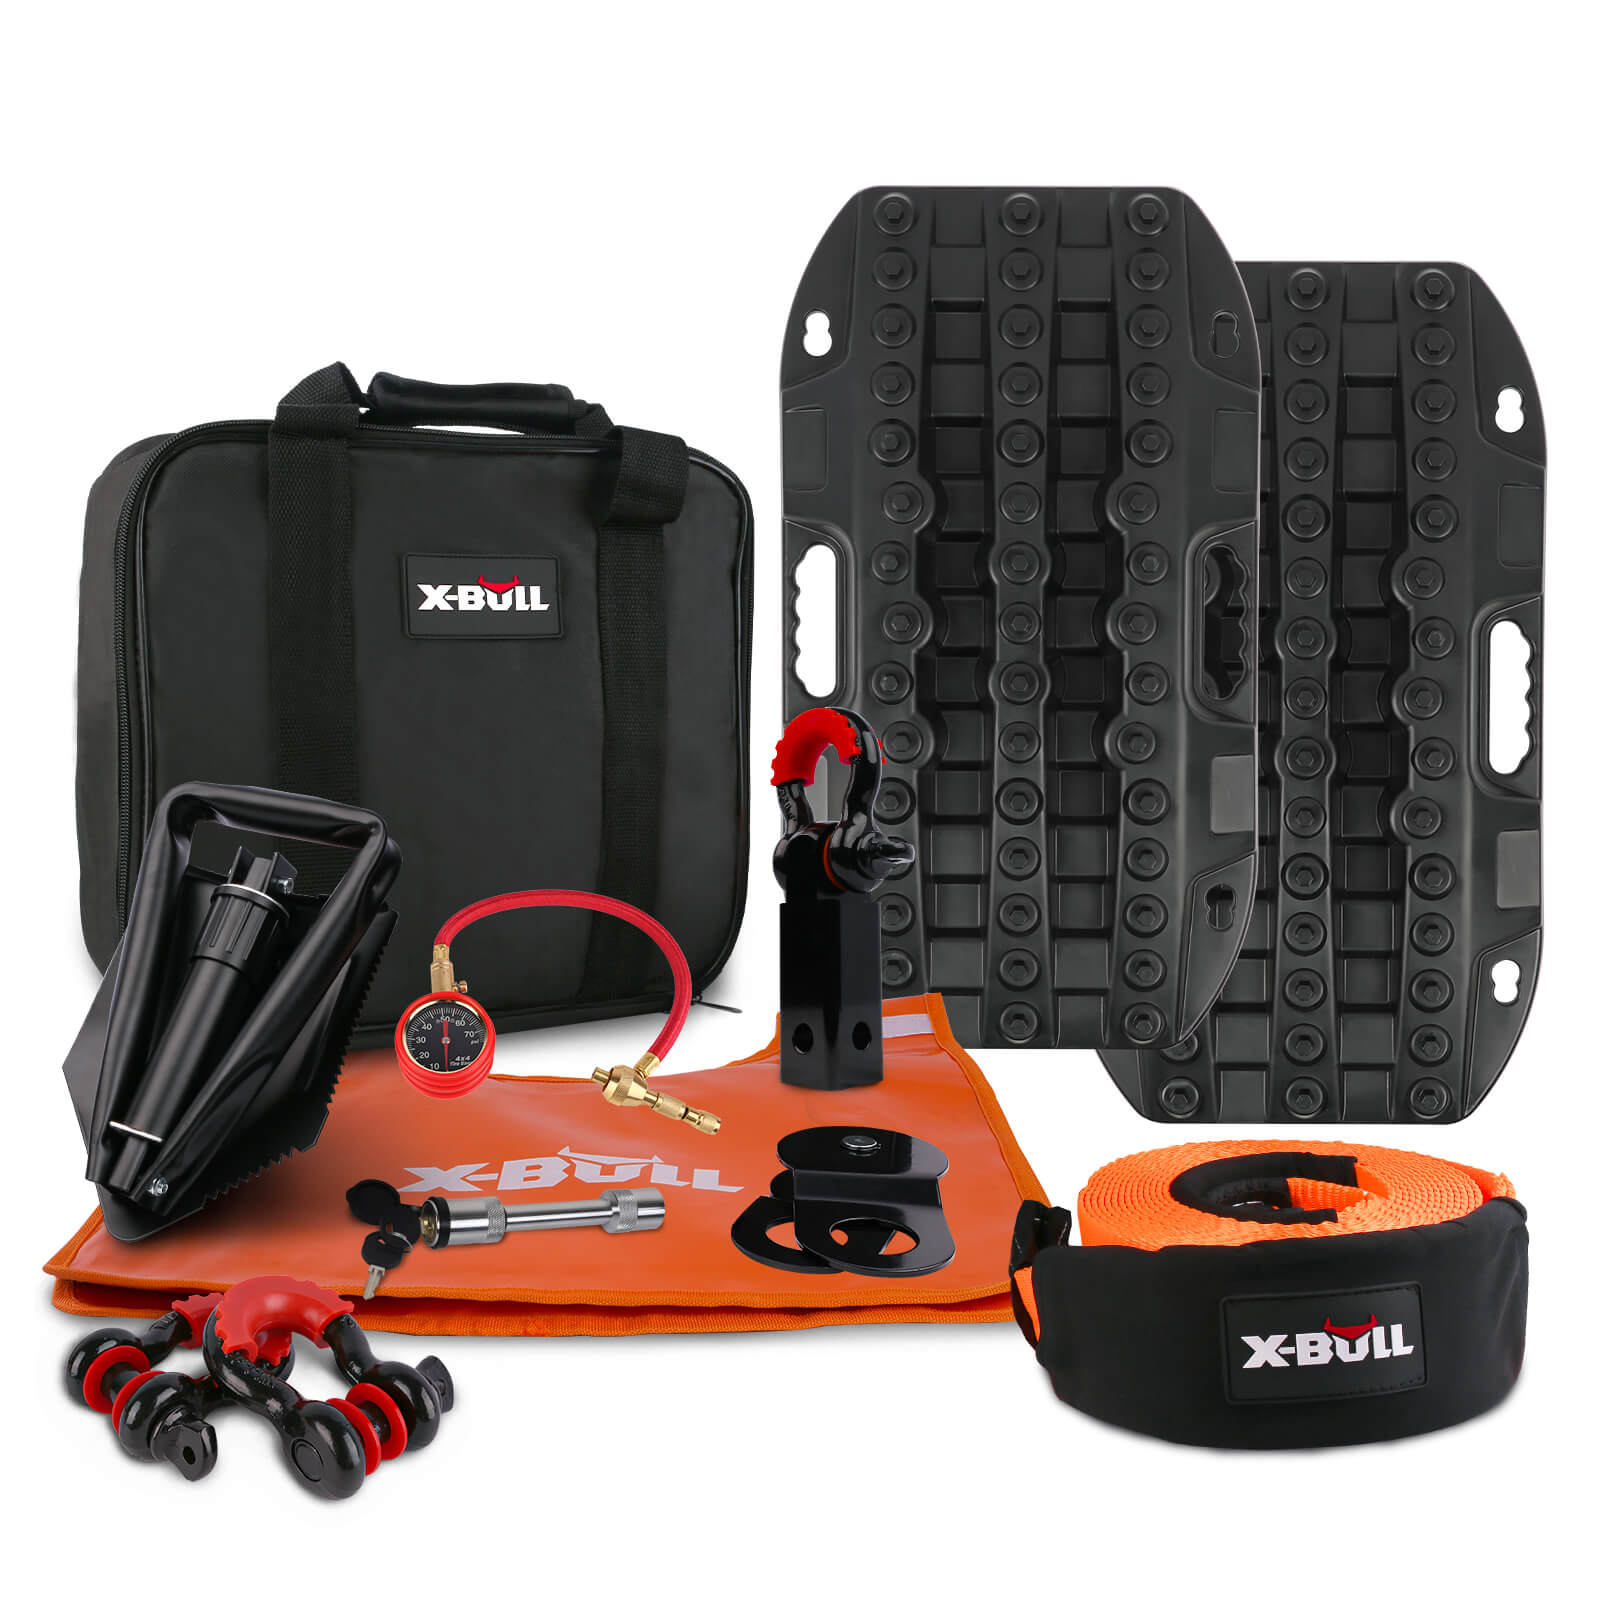 X-BULL Winch Recovery Kit with Mini Recovery TracksBoards Snatch Strap Off Road 4WD - SILBERSHELL